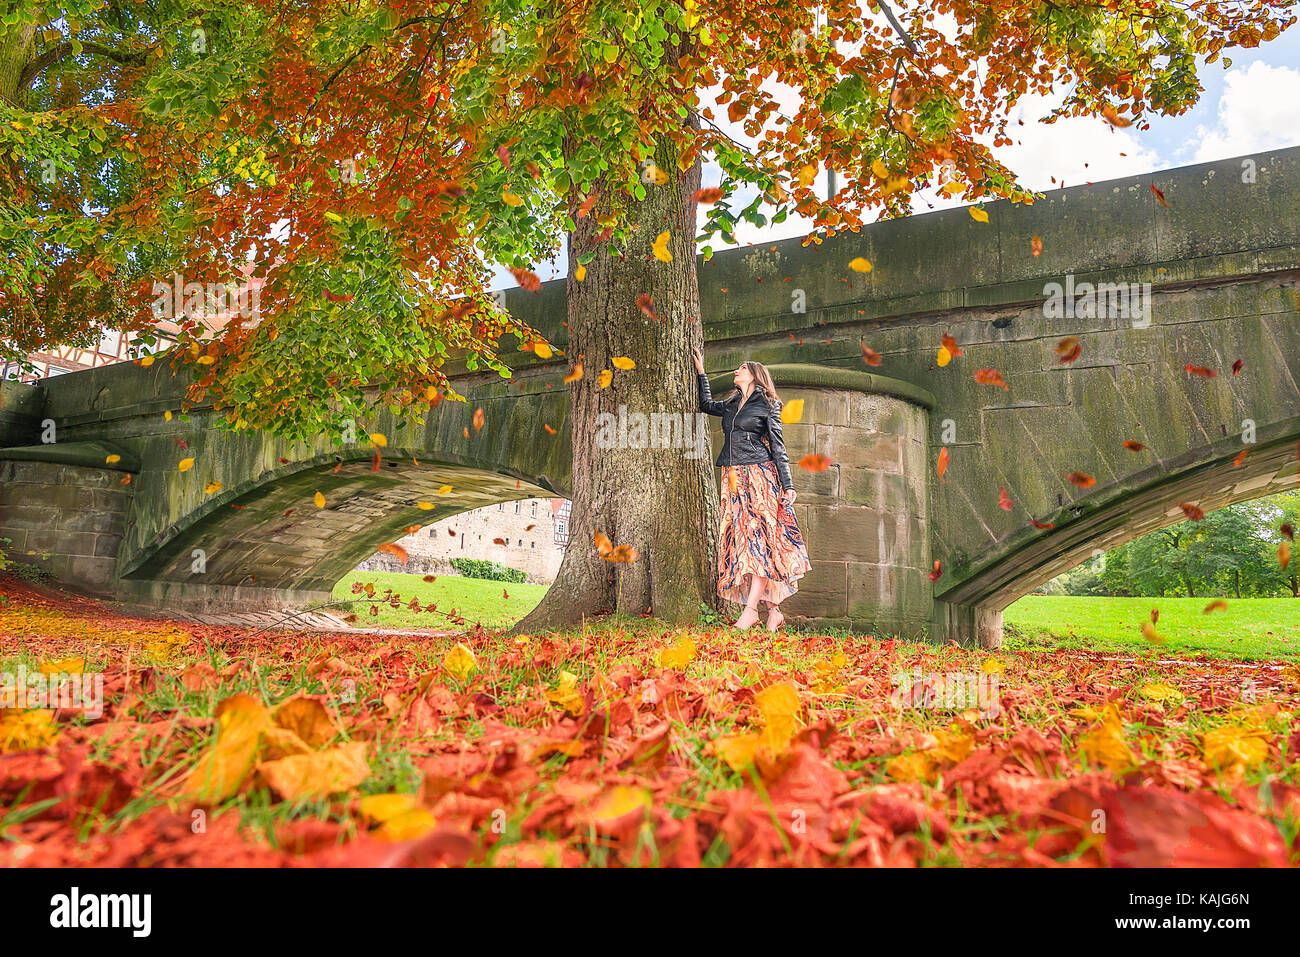 Autumn image with a young woman in a modern dress and a black jacket, staying under a tall tree and watching the colorful falling leaves. Stock Photo